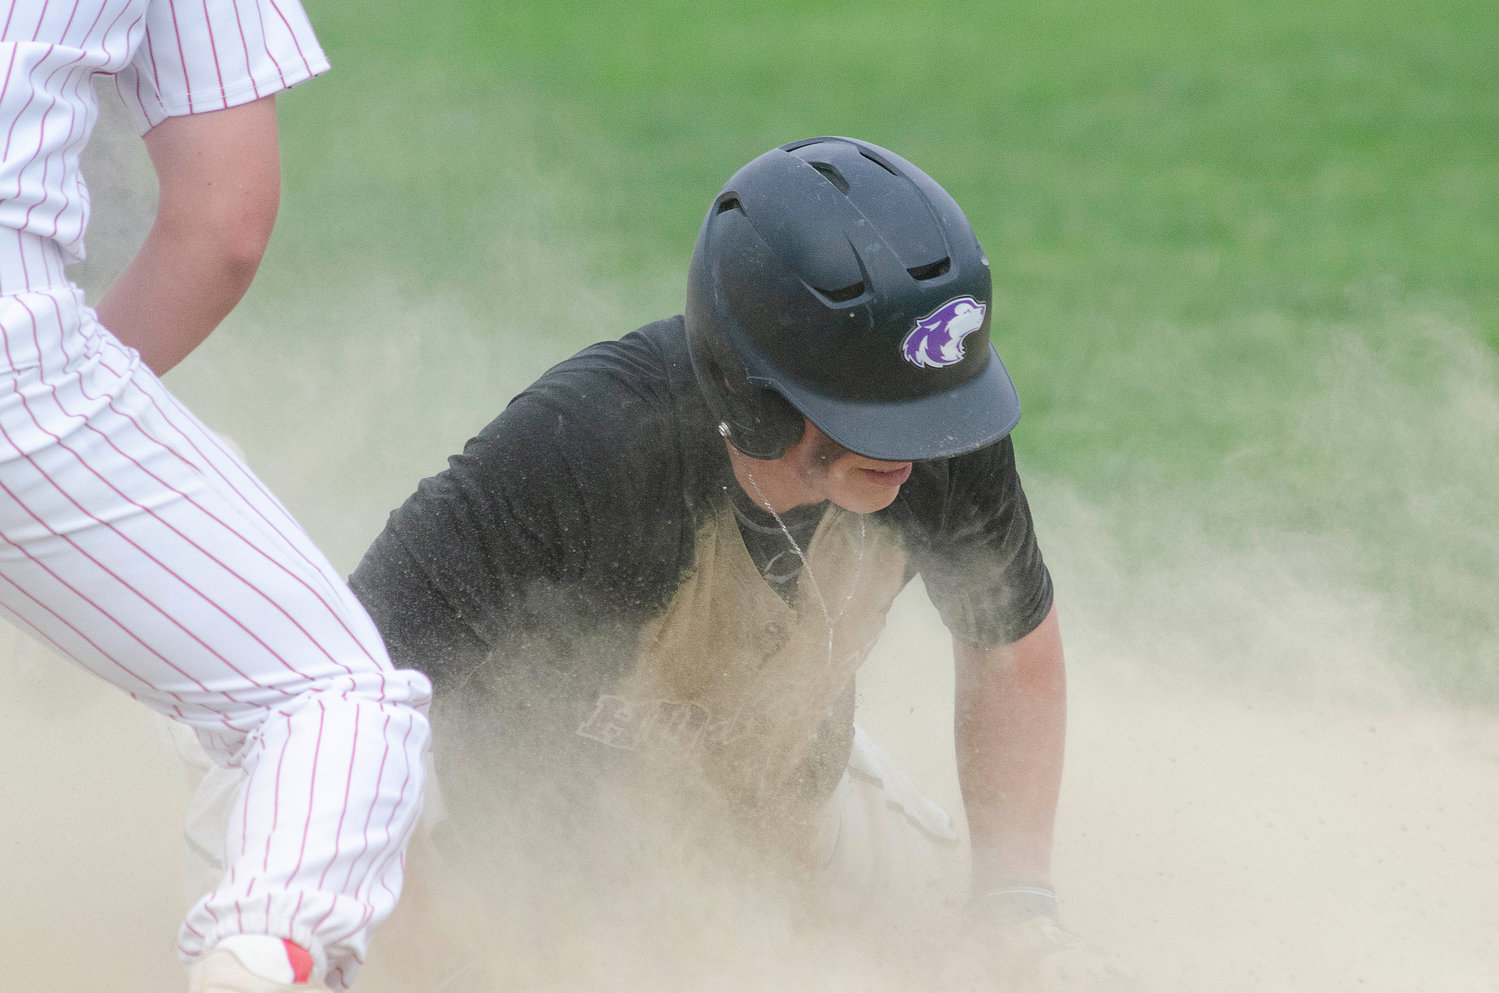 First baseman Matt Gale rounds second base after smashing a towering hit to right field for a triple to start off the bottom of the seventh inning with the Huskies down 9-8. Gale looked to head coach Mike Mazzarella as he rounded second base and slid into third base safely.